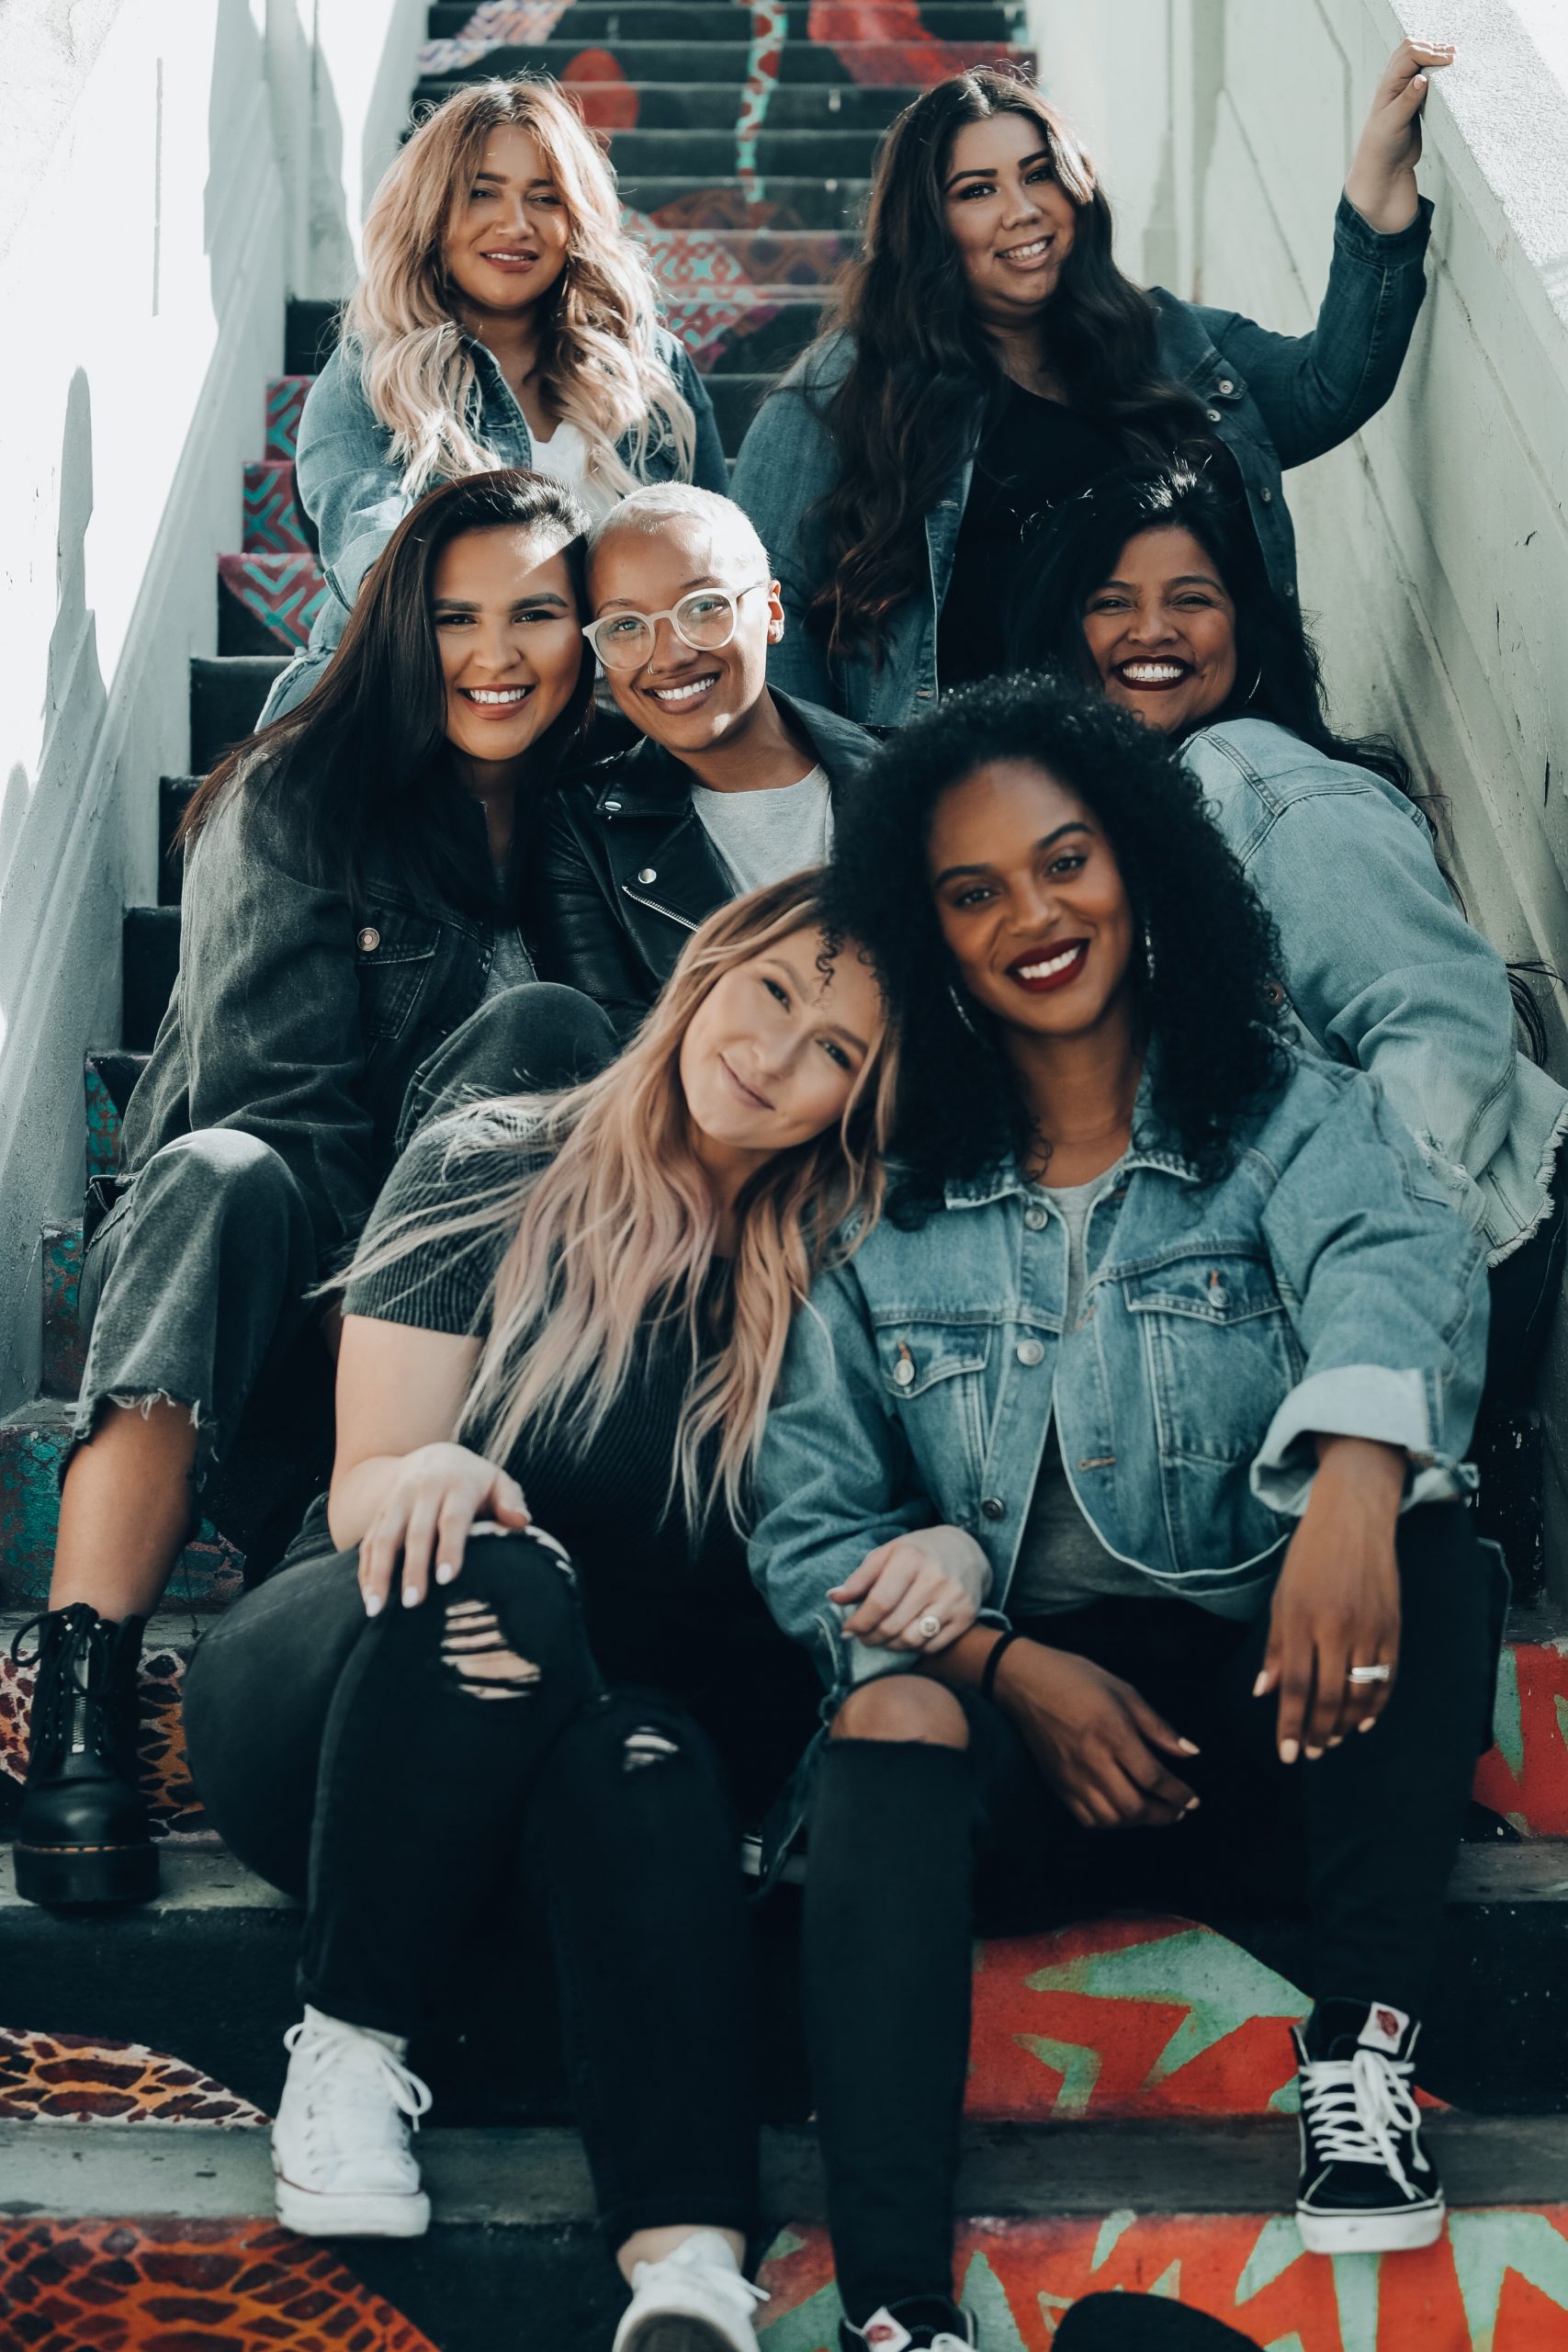 A grop of young women of all sizes and races sit on a flight of stairs smiling at the camera. They are all dressed casually and are smiling at the camera.